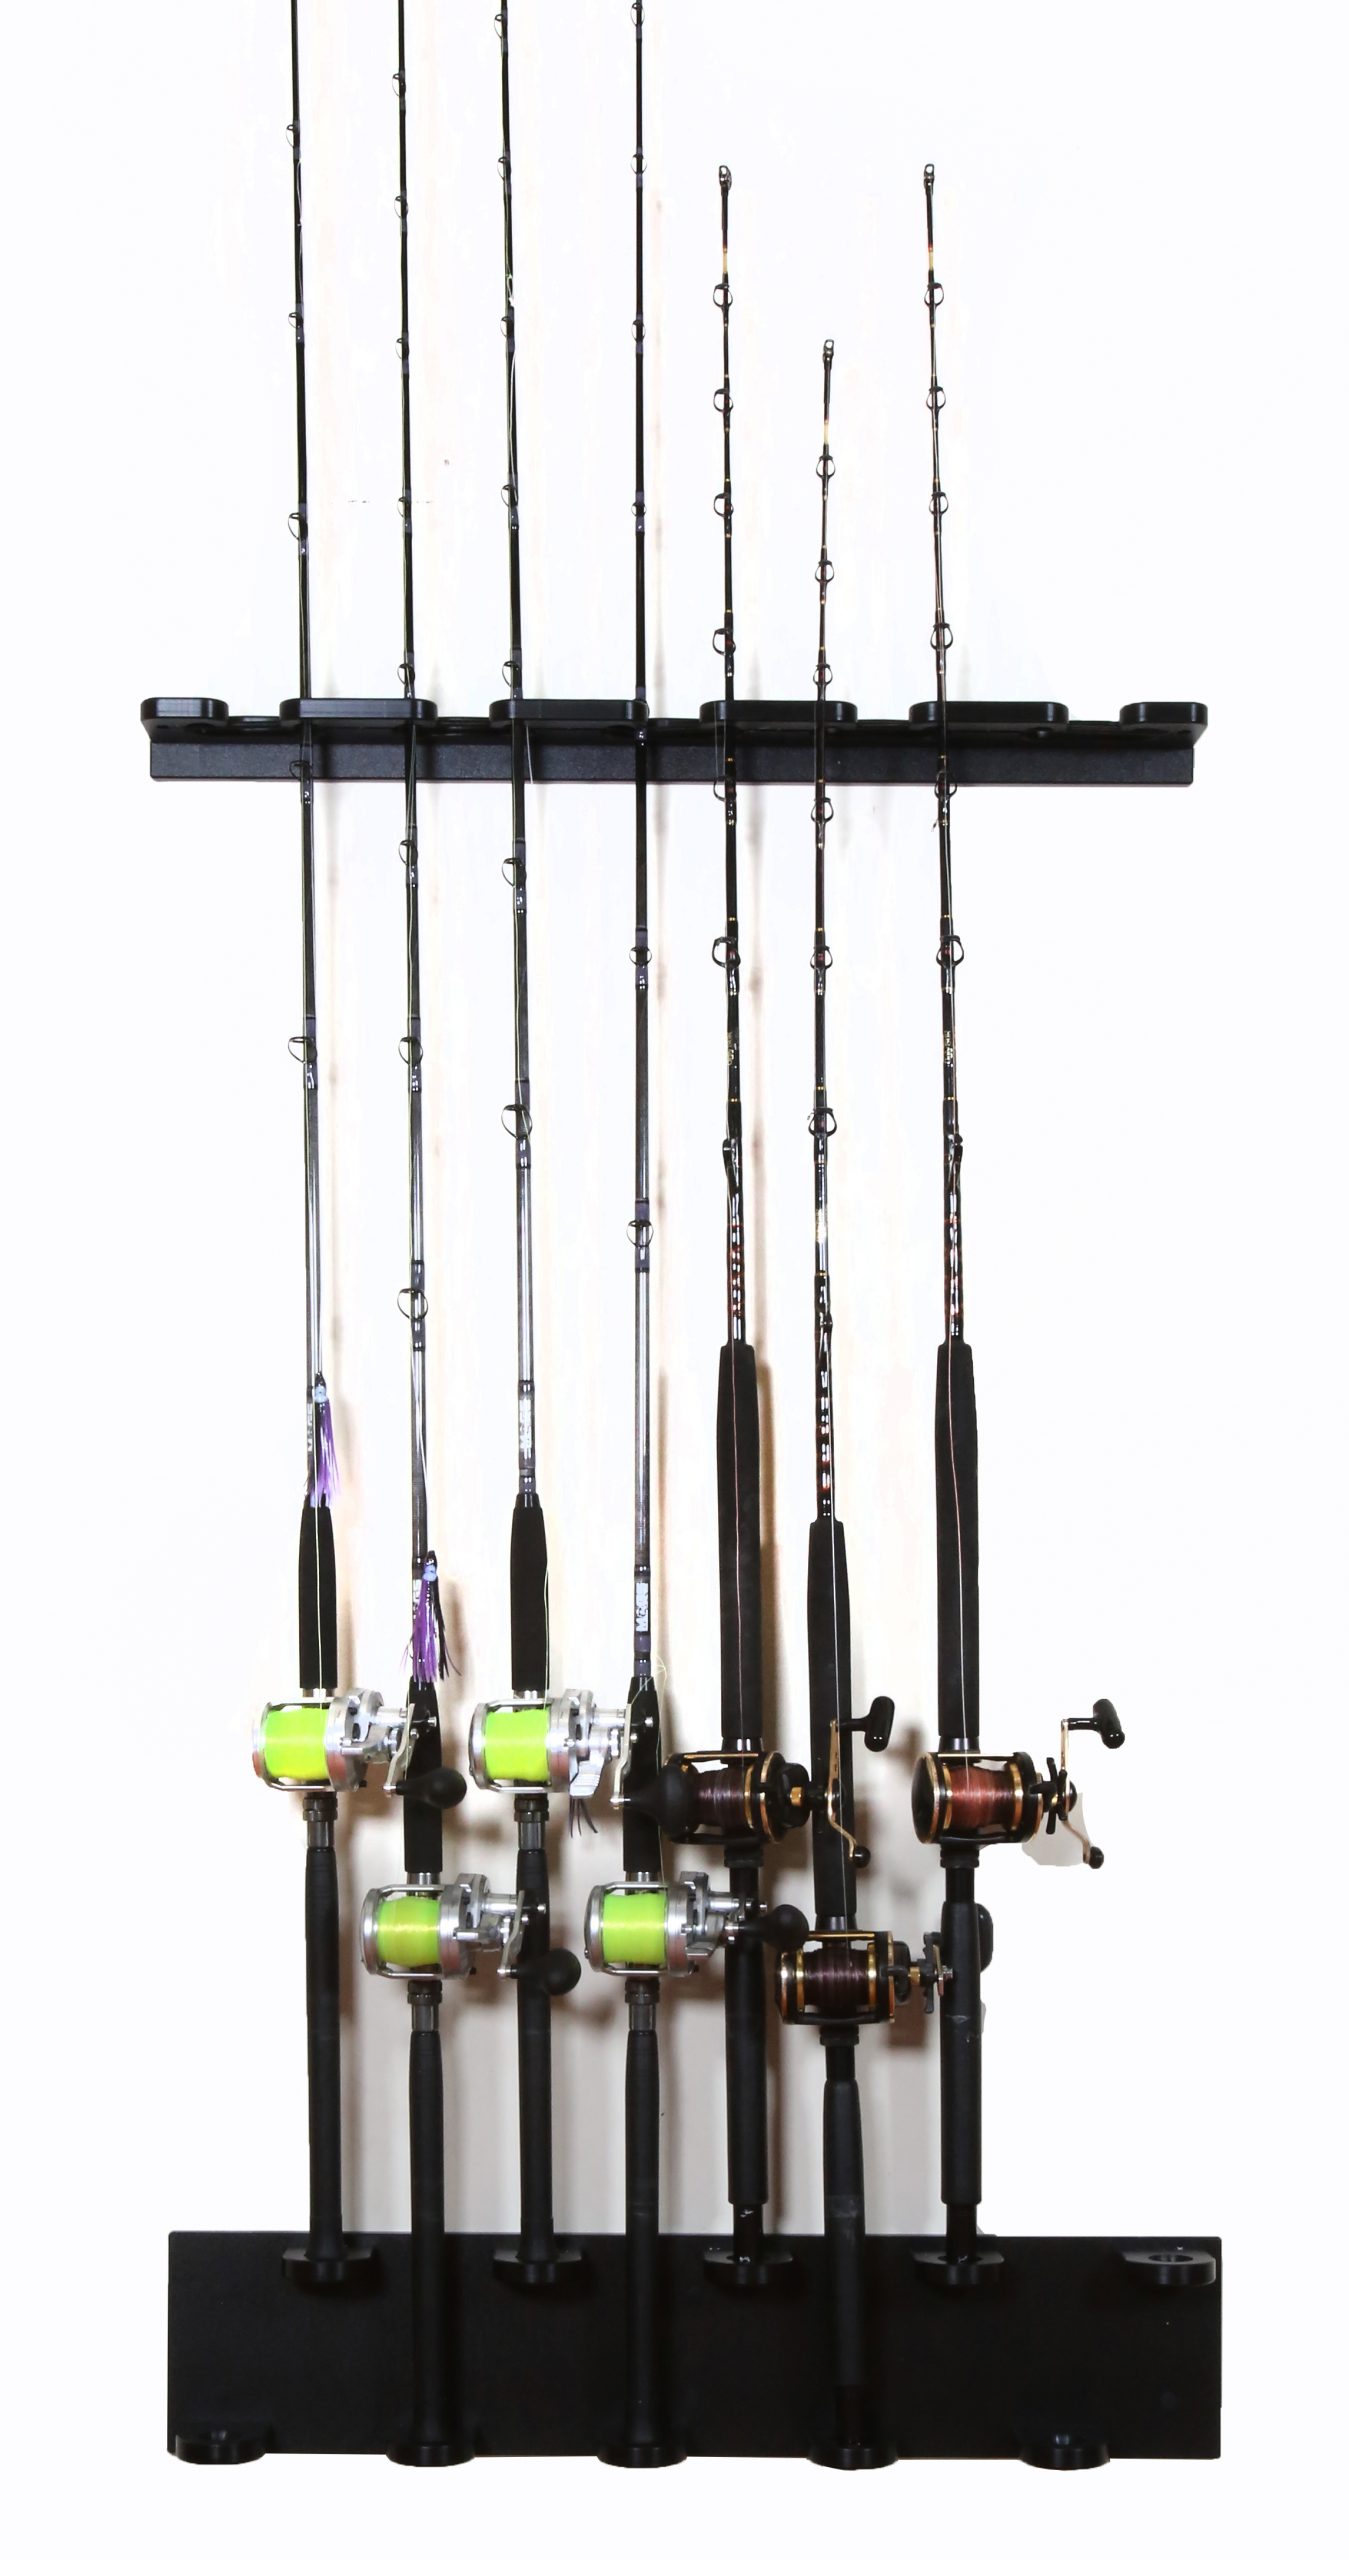 (2 Units) Vertical Wall Mount For 10 Rods & Reels With Varied Heights For  Maximum Space